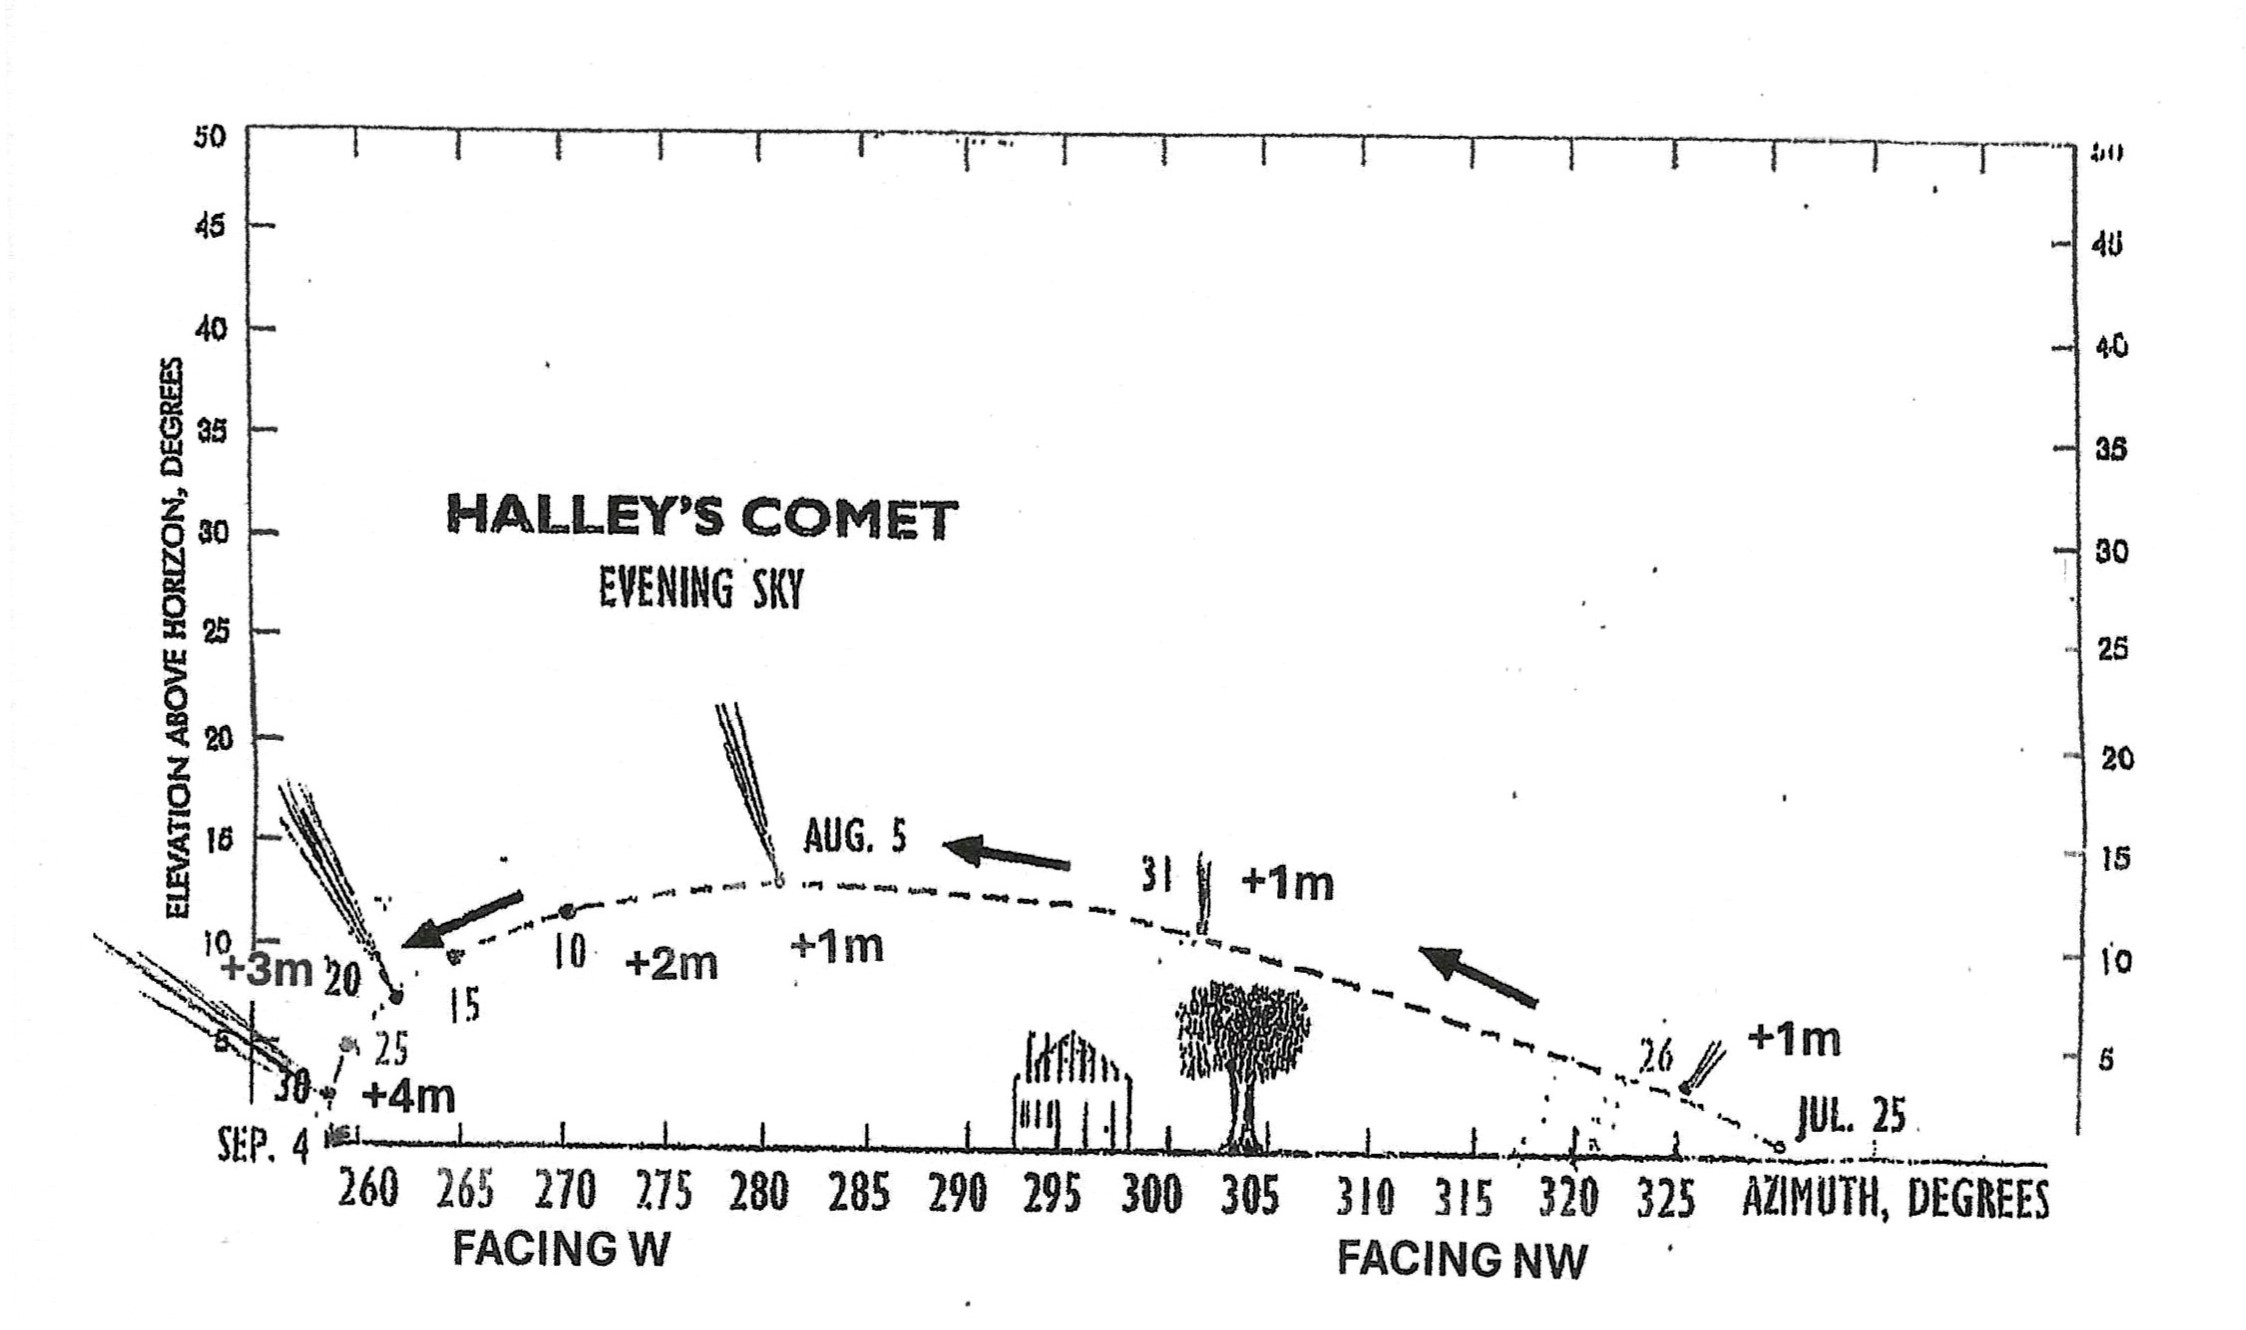 a chart showing where and when halley's comet can be seen in late summer 2061